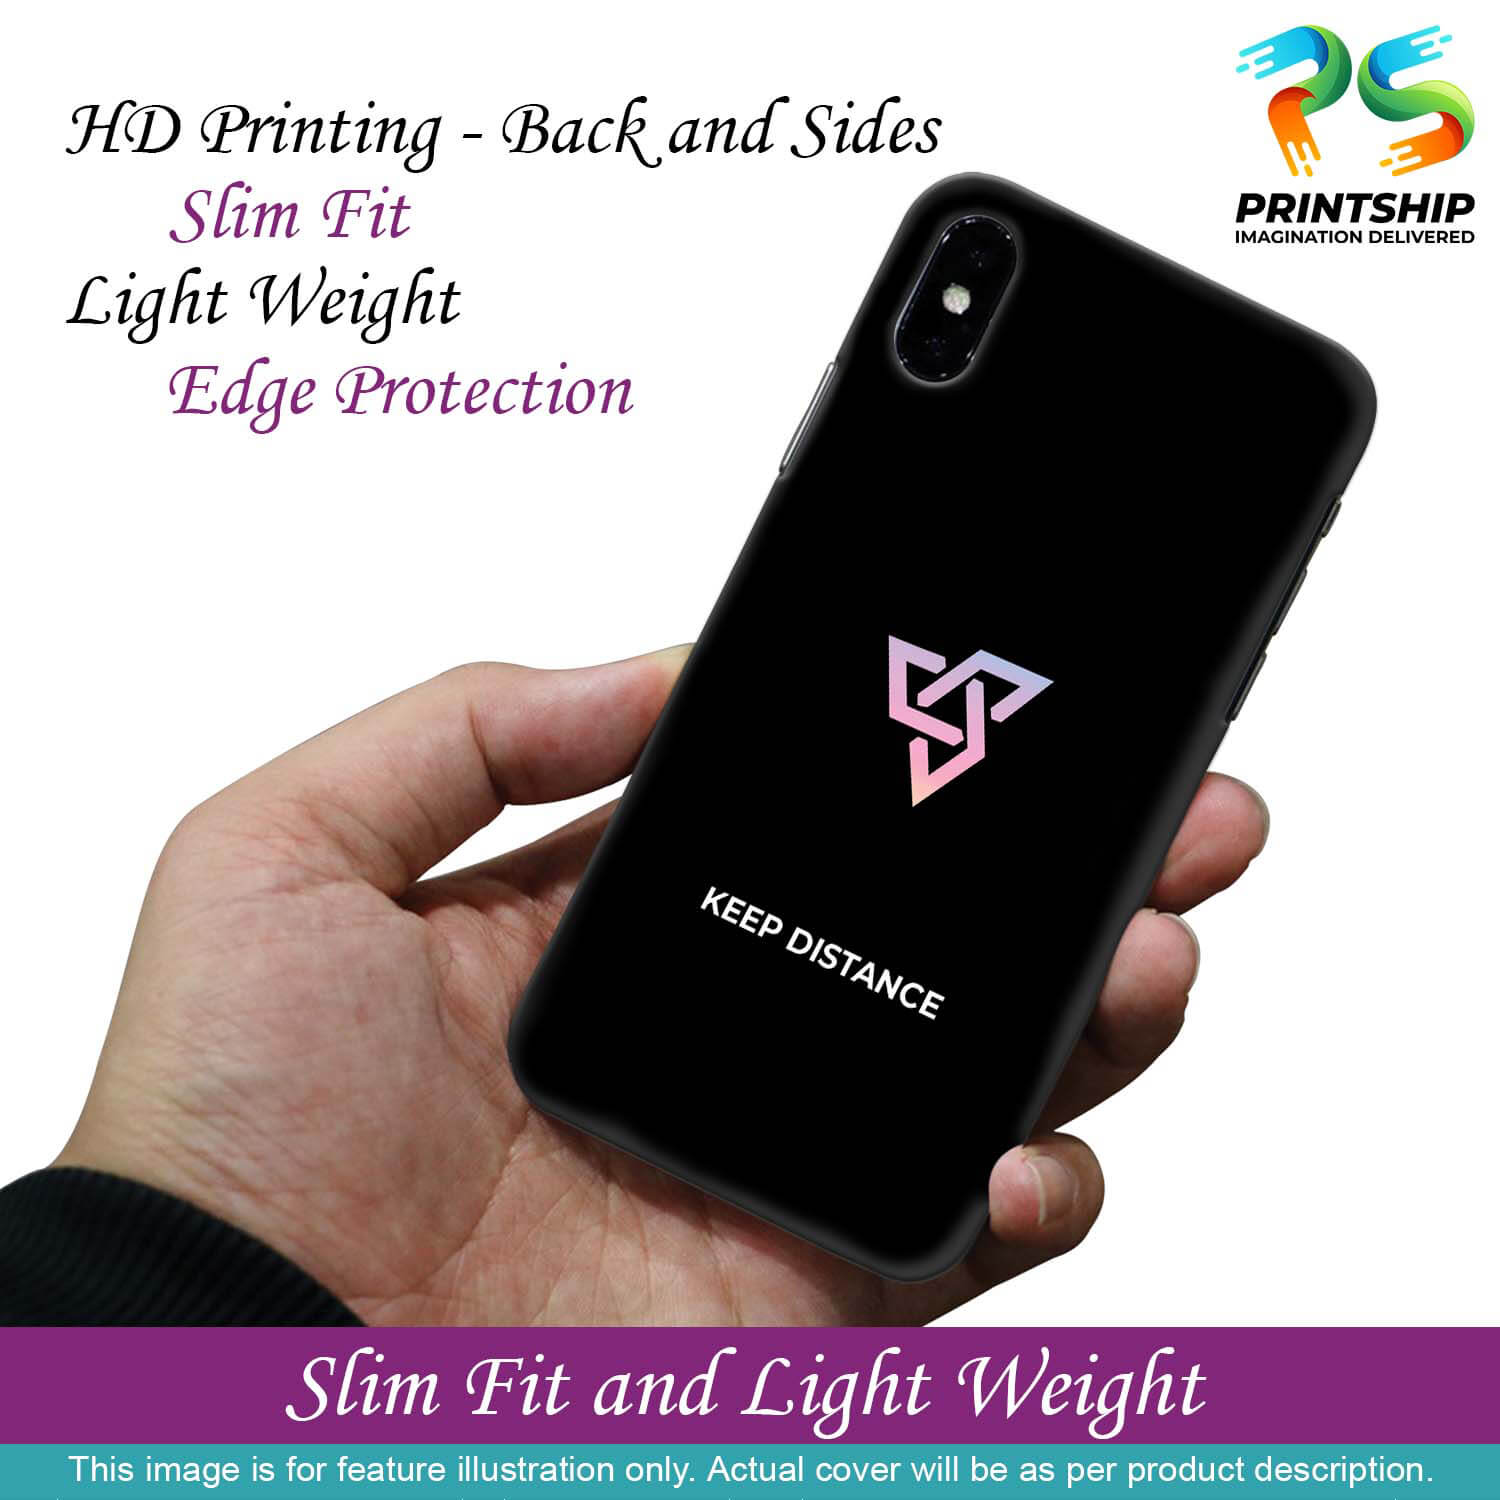 PS1334-Keep Distance Back Cover for Oppo A52